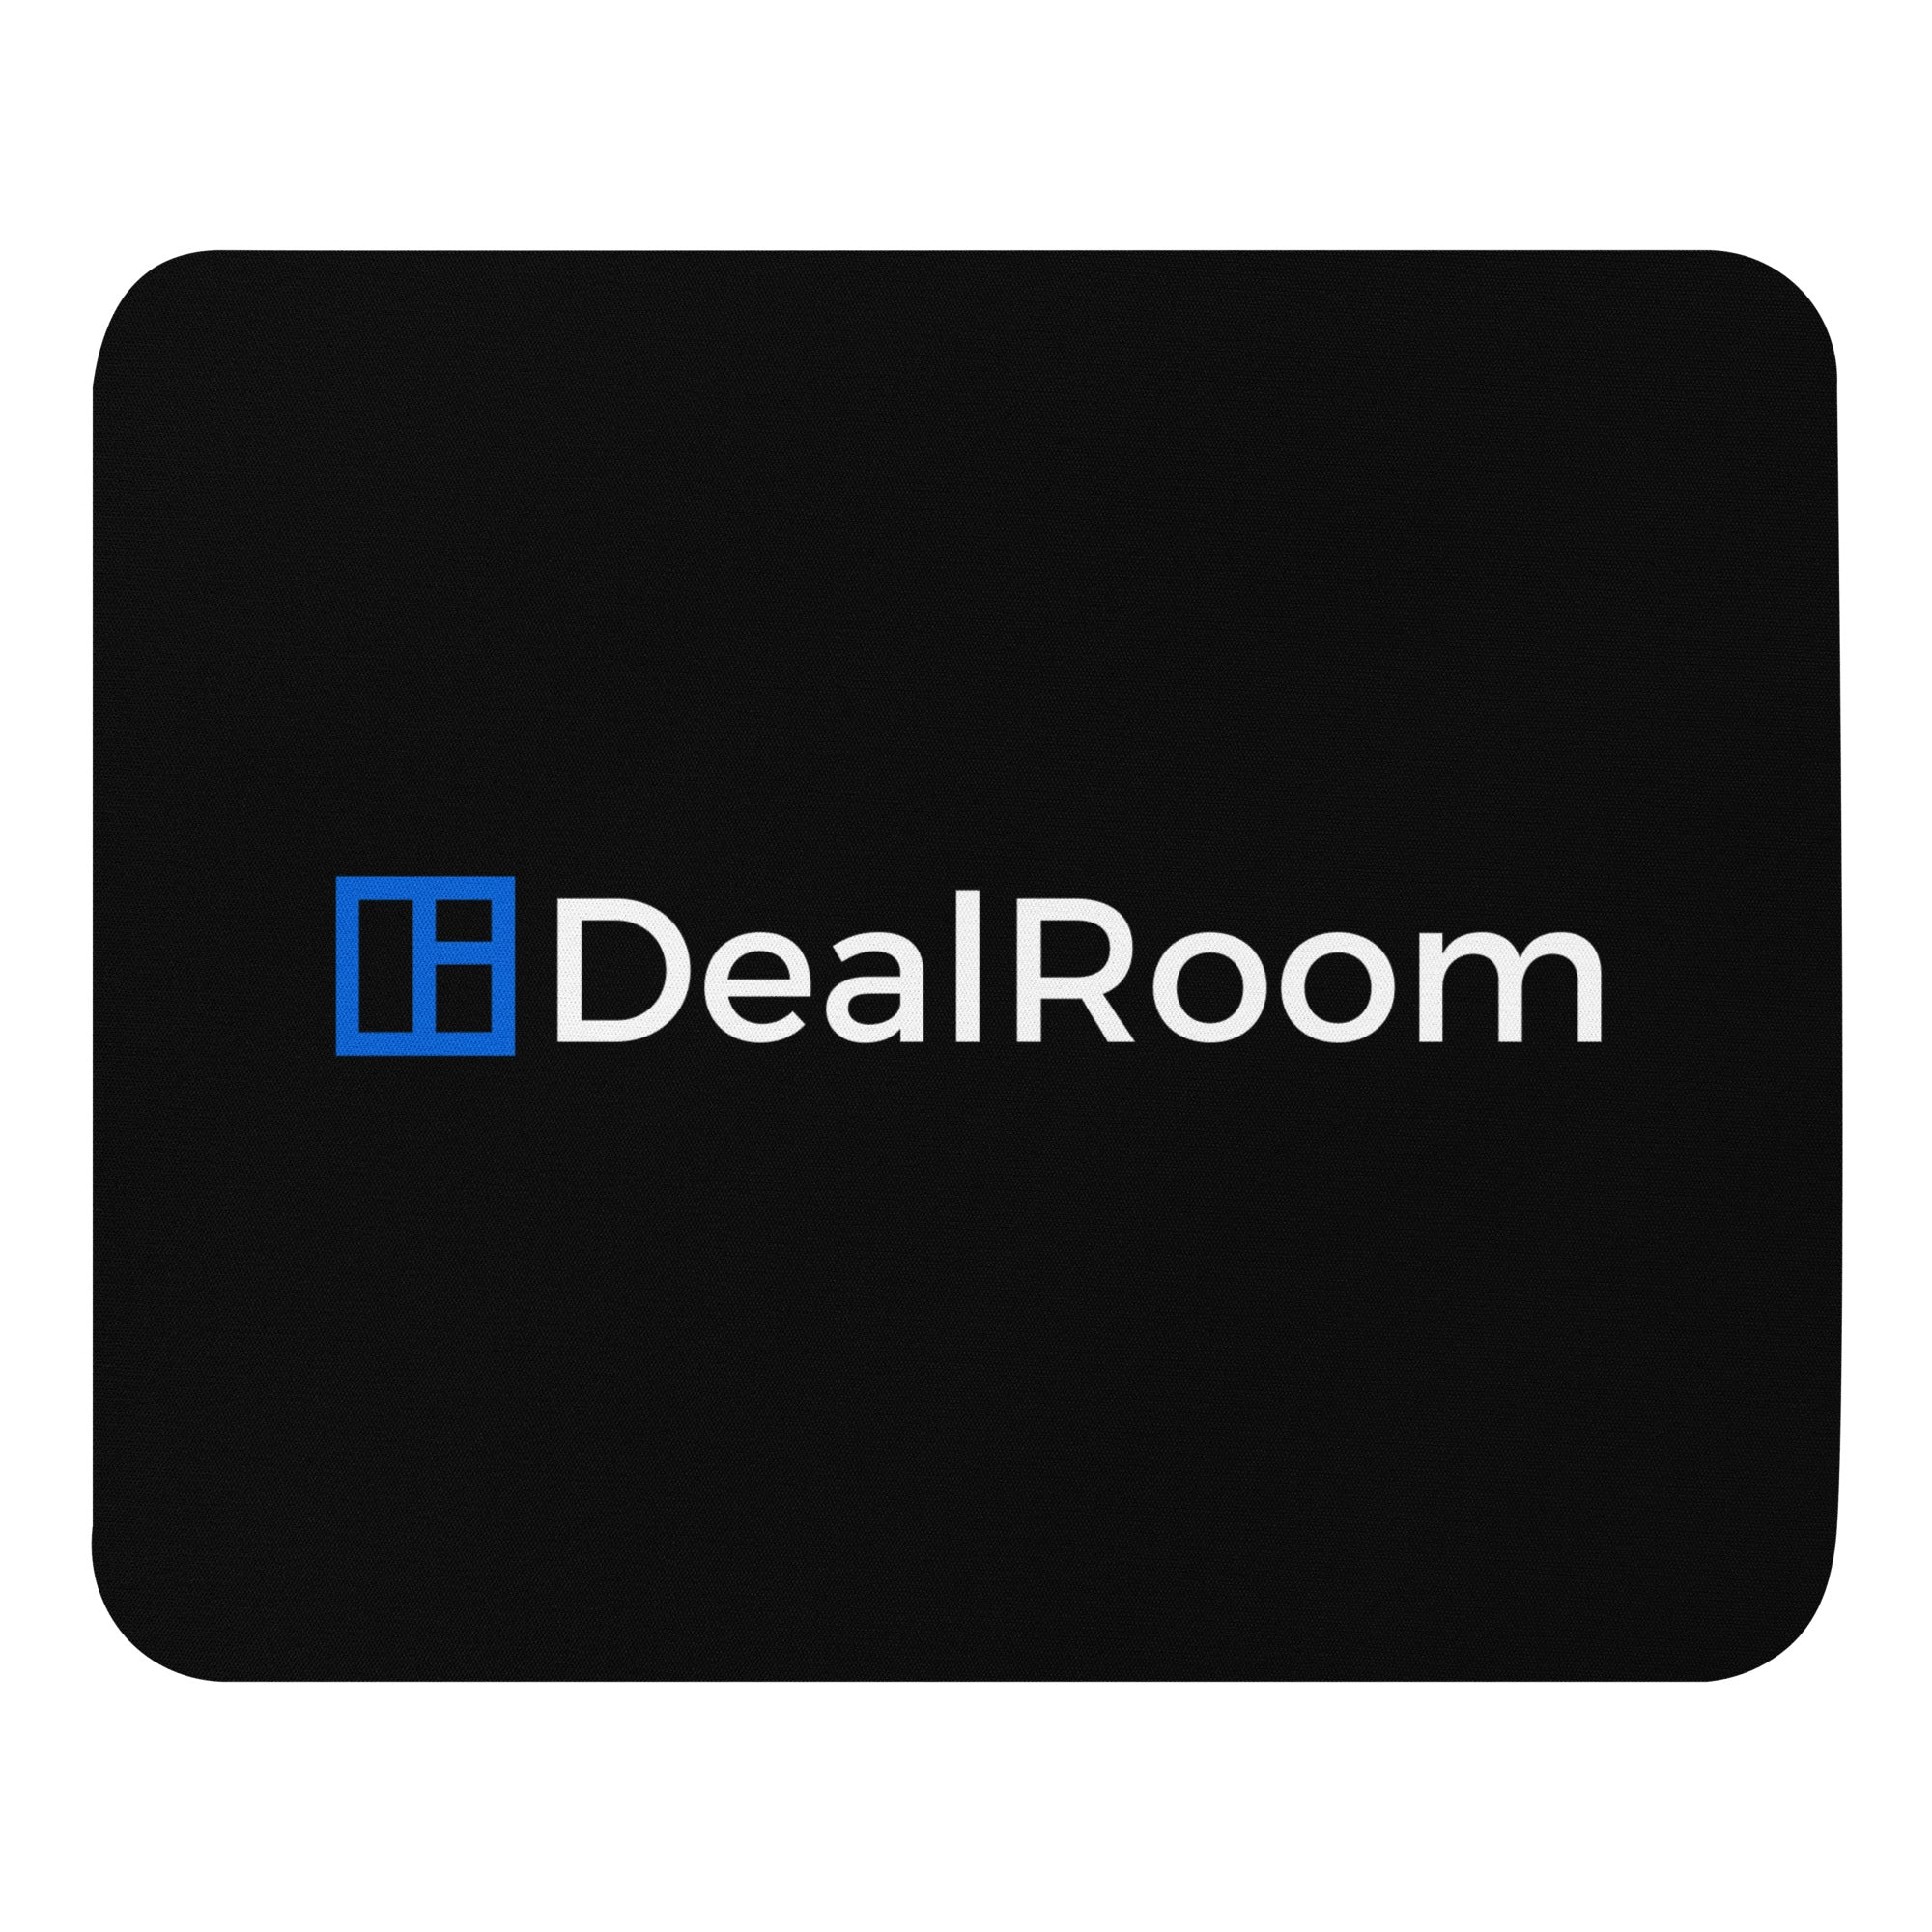 DealRoom Mouse pad